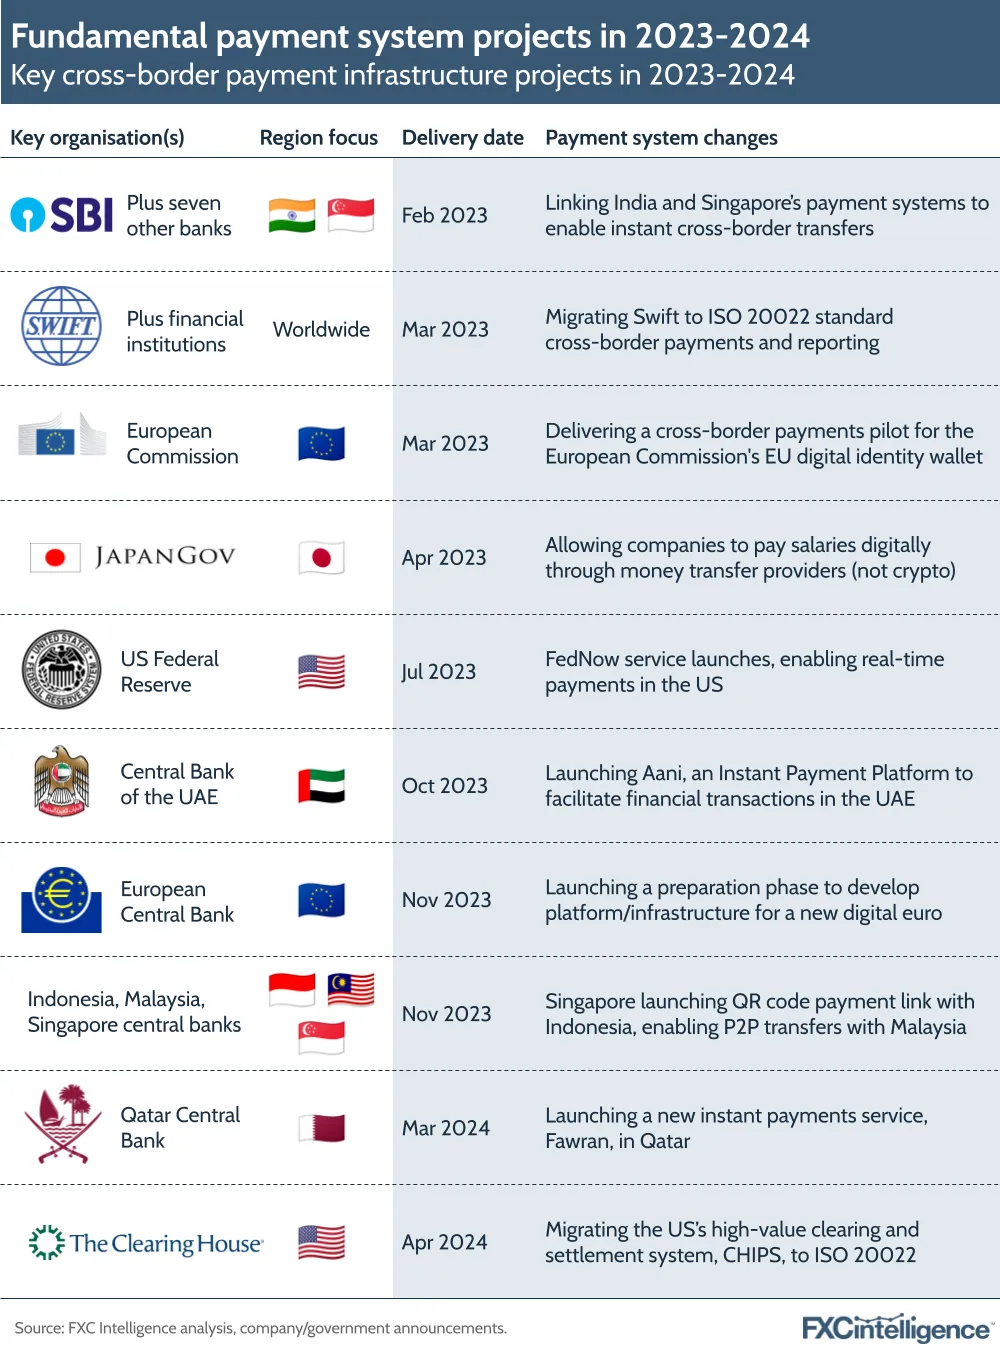 Fundamental payment system projects in 2023-2024
Key cross-border payment infrastructure projects in 2023-2024